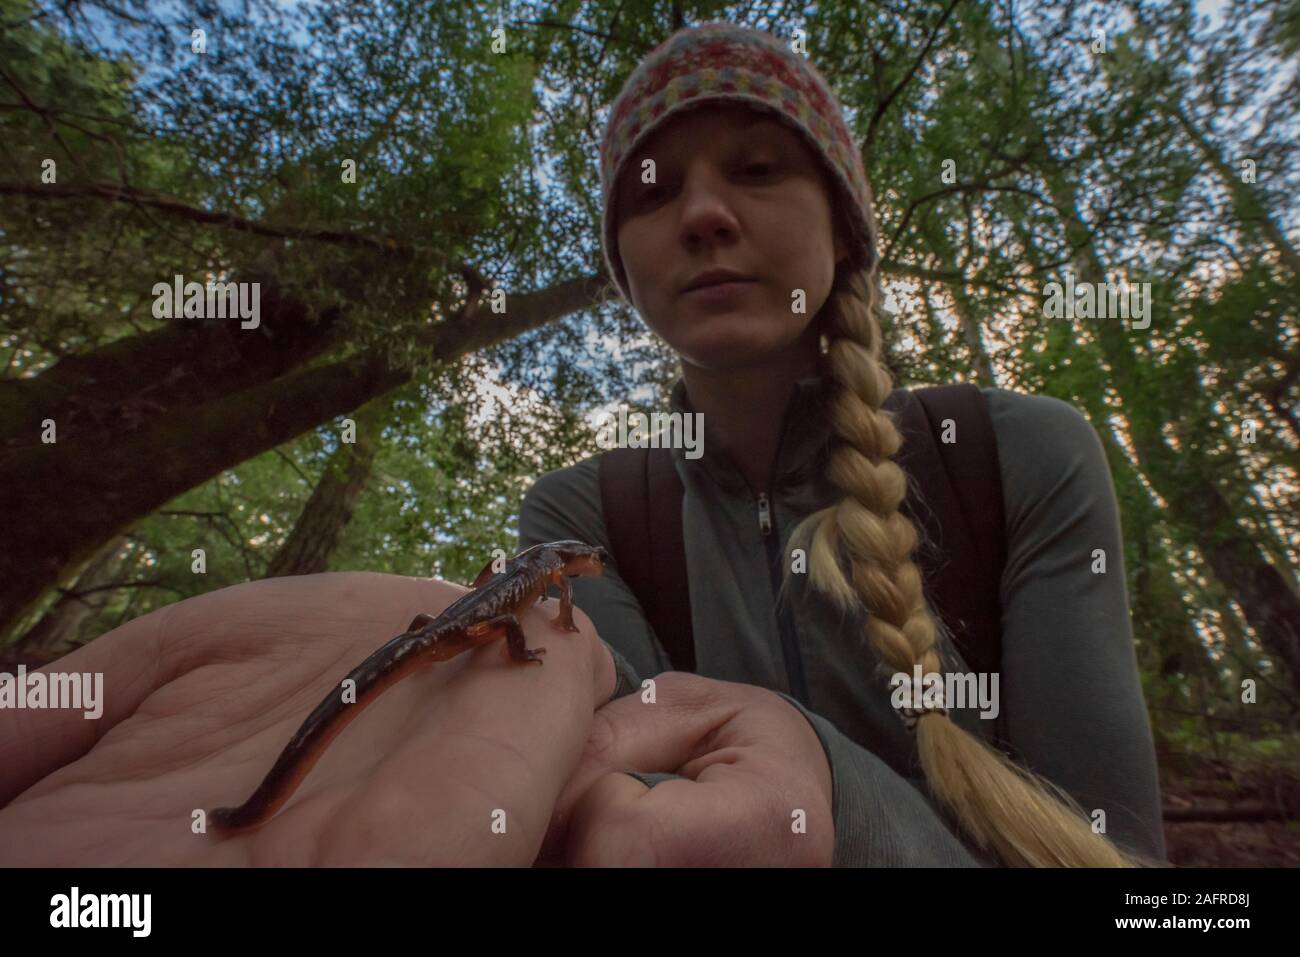 A female hiker communing with nature, holding a salamander and examining it in Marin County, California. Stock Photo